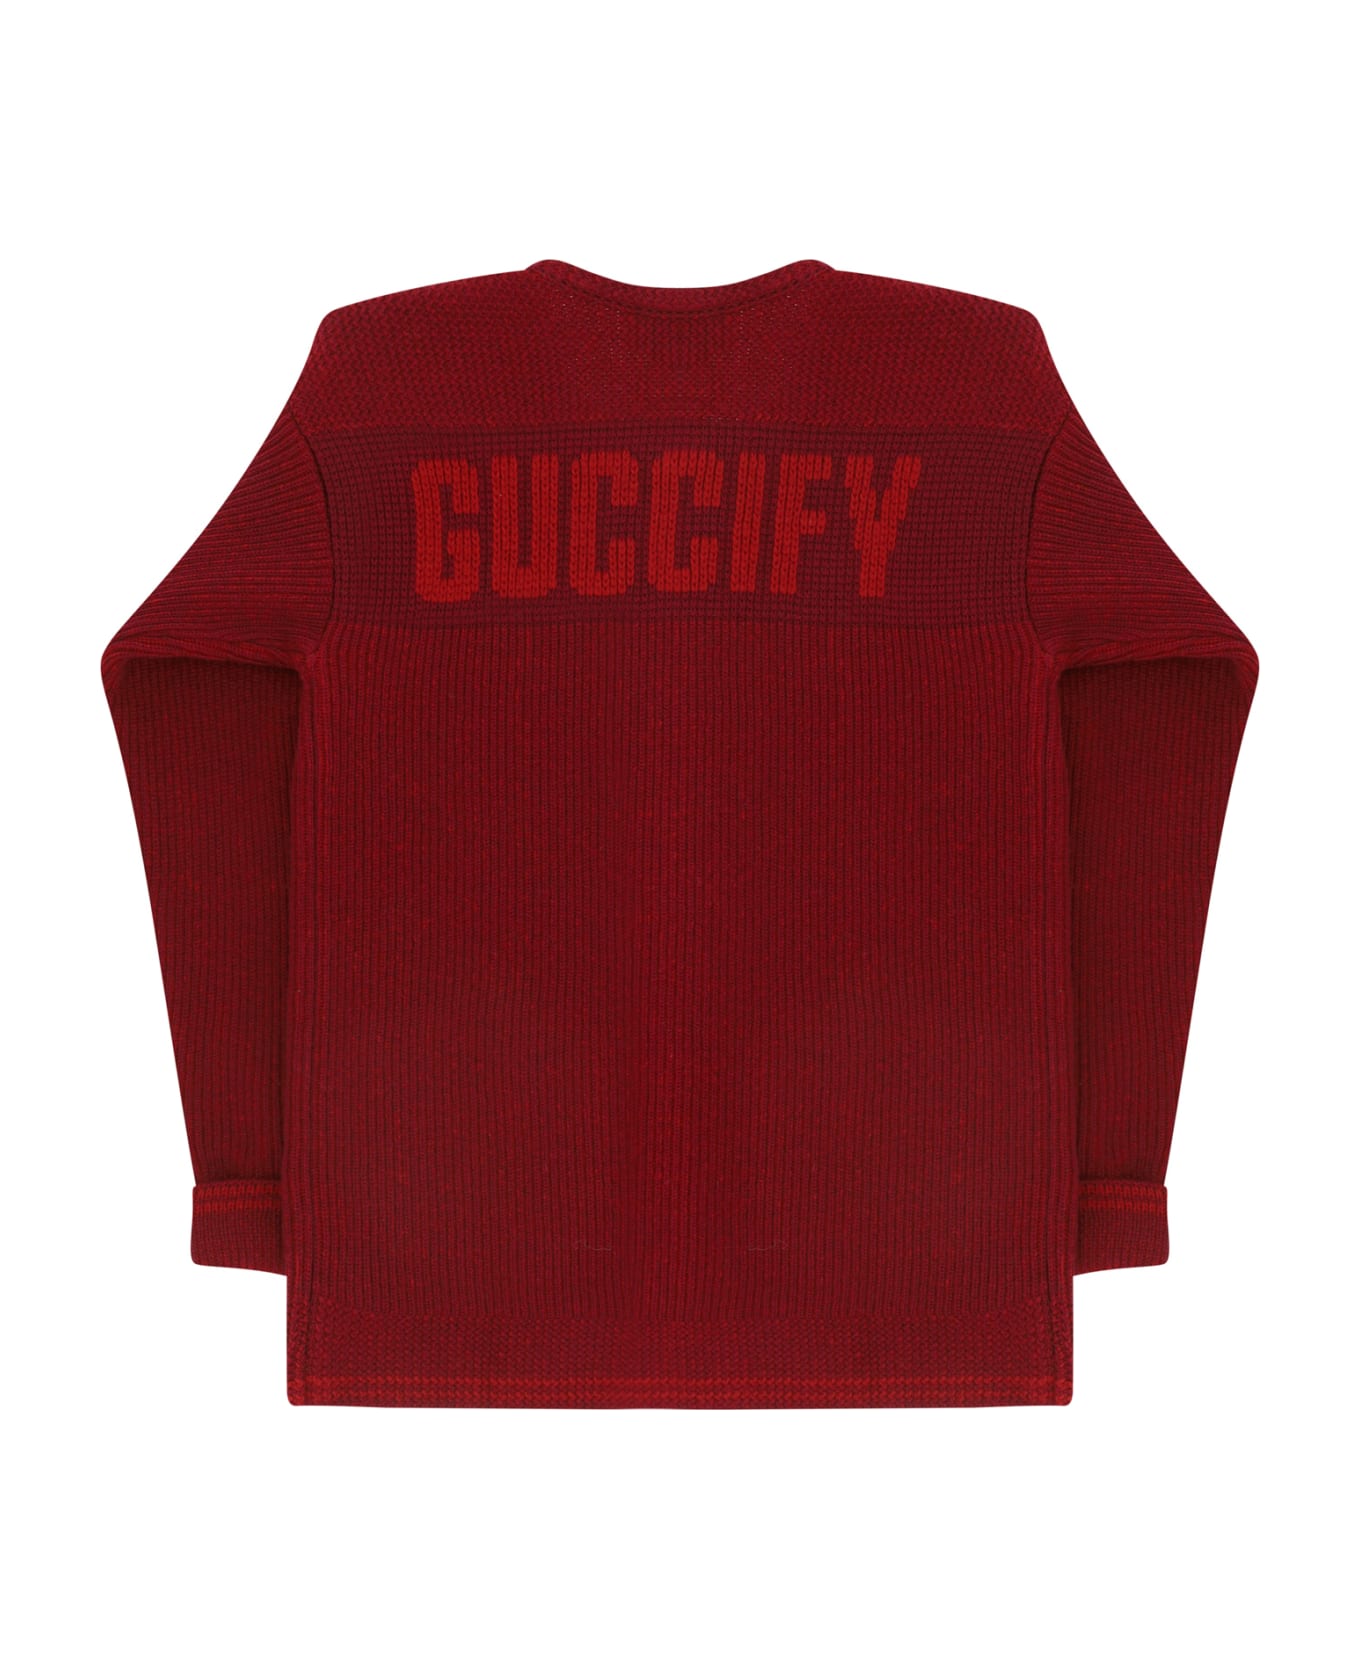 Gucci Sweater For Boy - Bordeaux/red